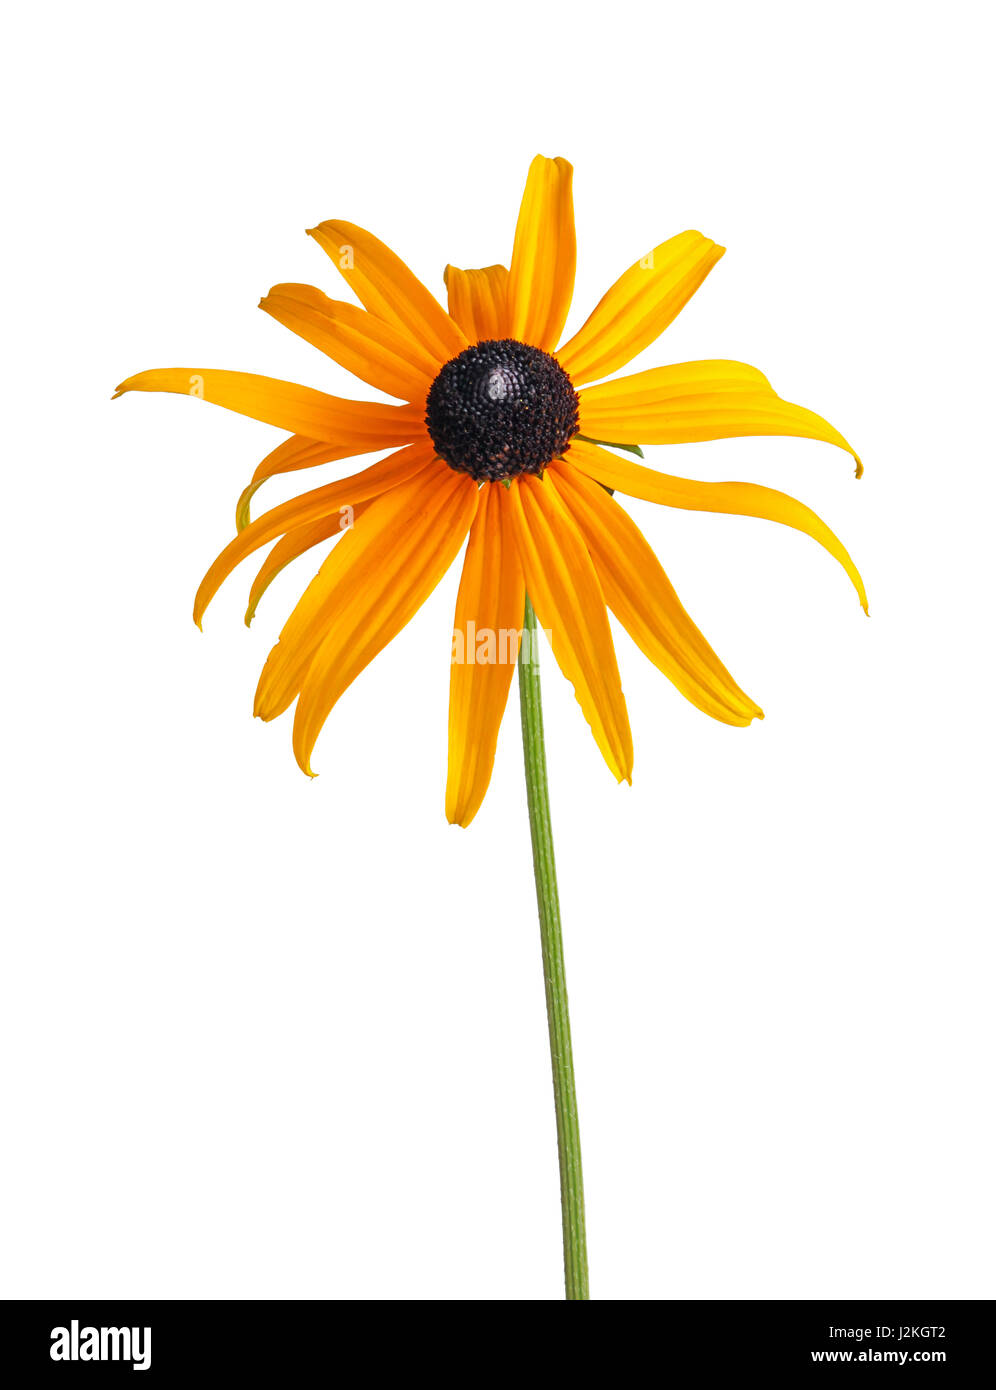 Single compound, yellow and black flower of a brown- or black-eyed Susan (Rudbeckia hirta) isolated against a white background Stock Photo